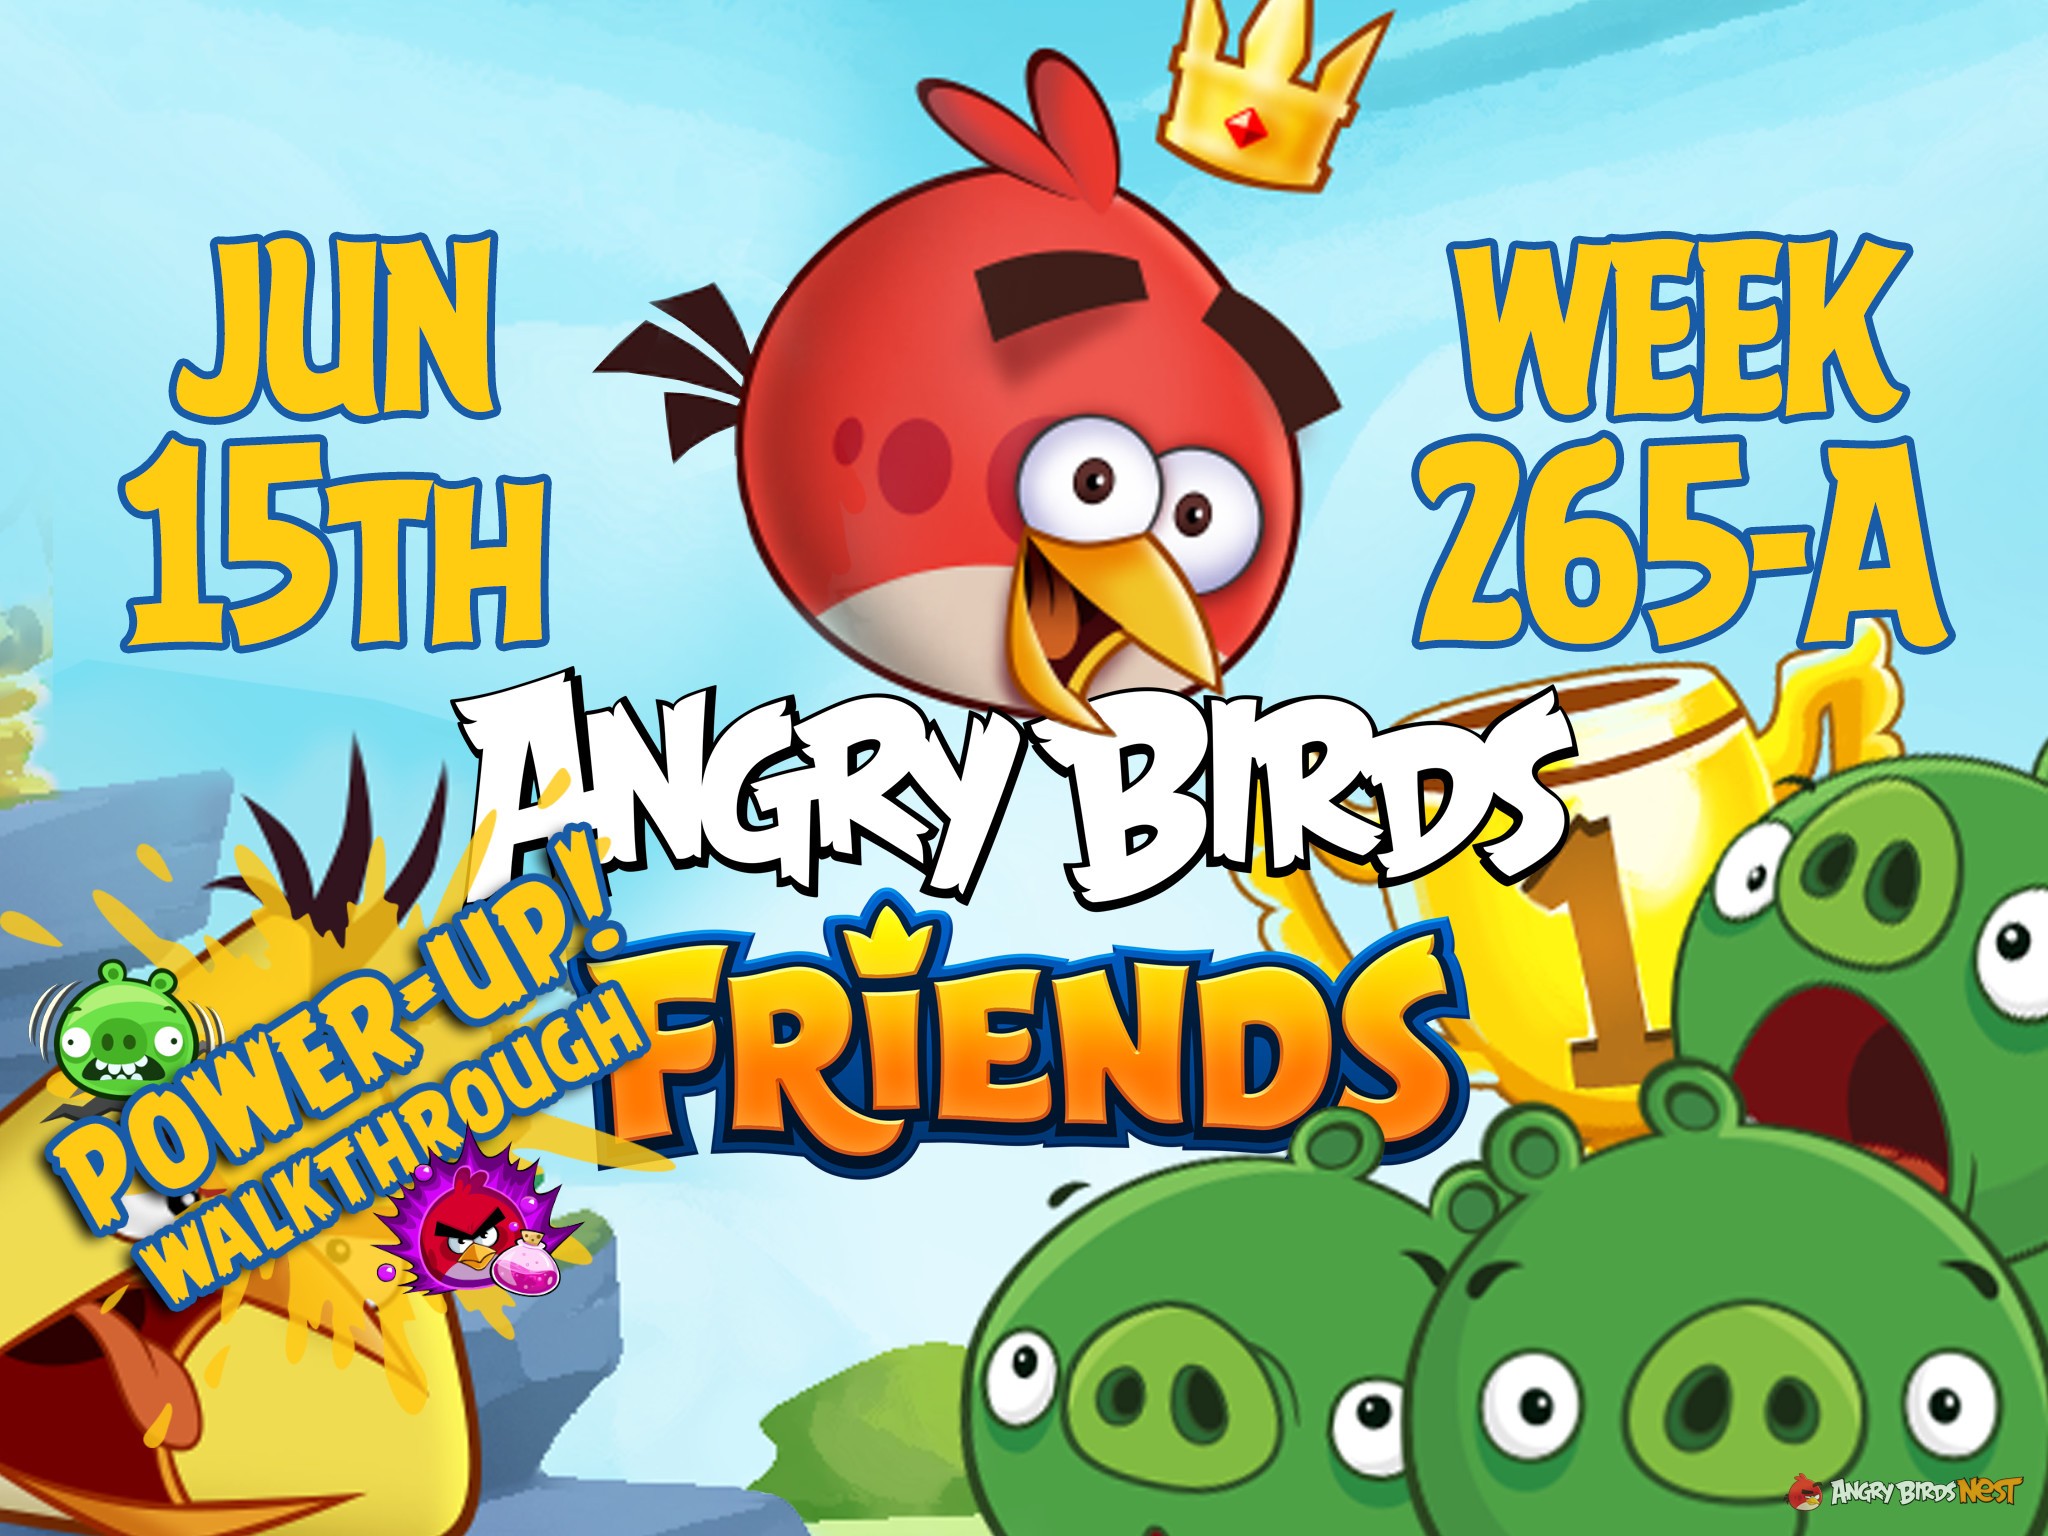 Angry Birds Friends Tournament Week 265-A Feature Image PU